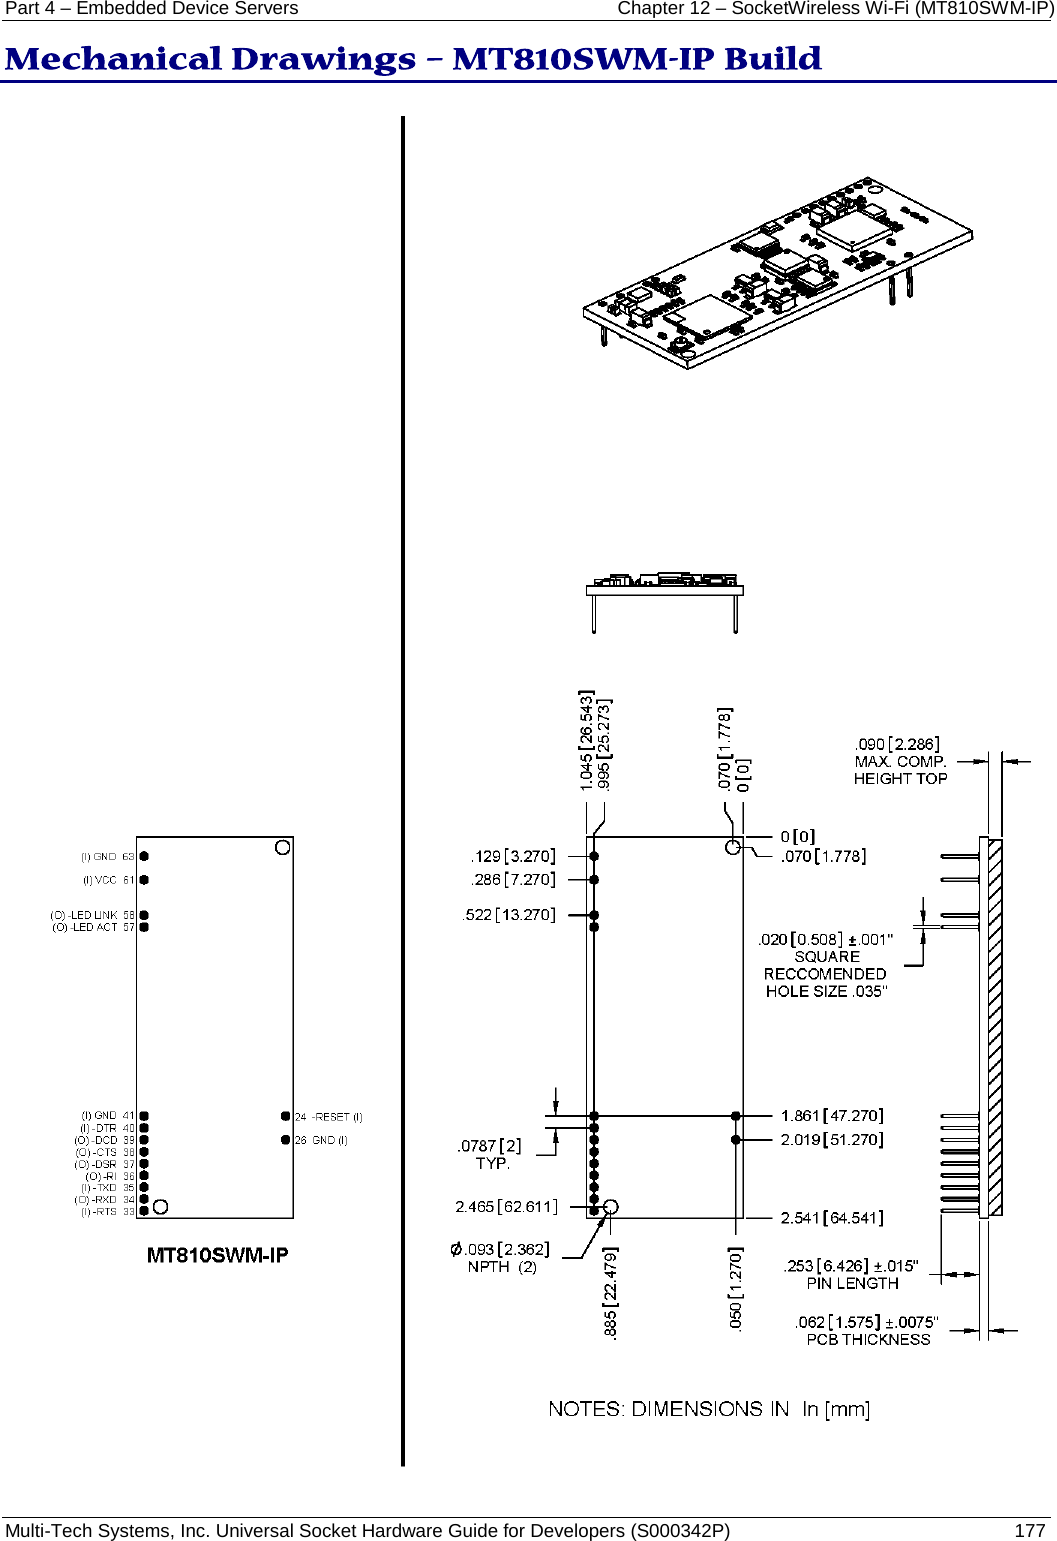 Part 4 – Embedded Device Servers Chapter 12 – SocketWireless Wi-Fi (MT810SWM-IP) Multi-Tech Systems, Inc. Universal Socket Hardware Guide for Developers (S000342P)  177  Mechanical Drawings – MT810SWM-IP Build  